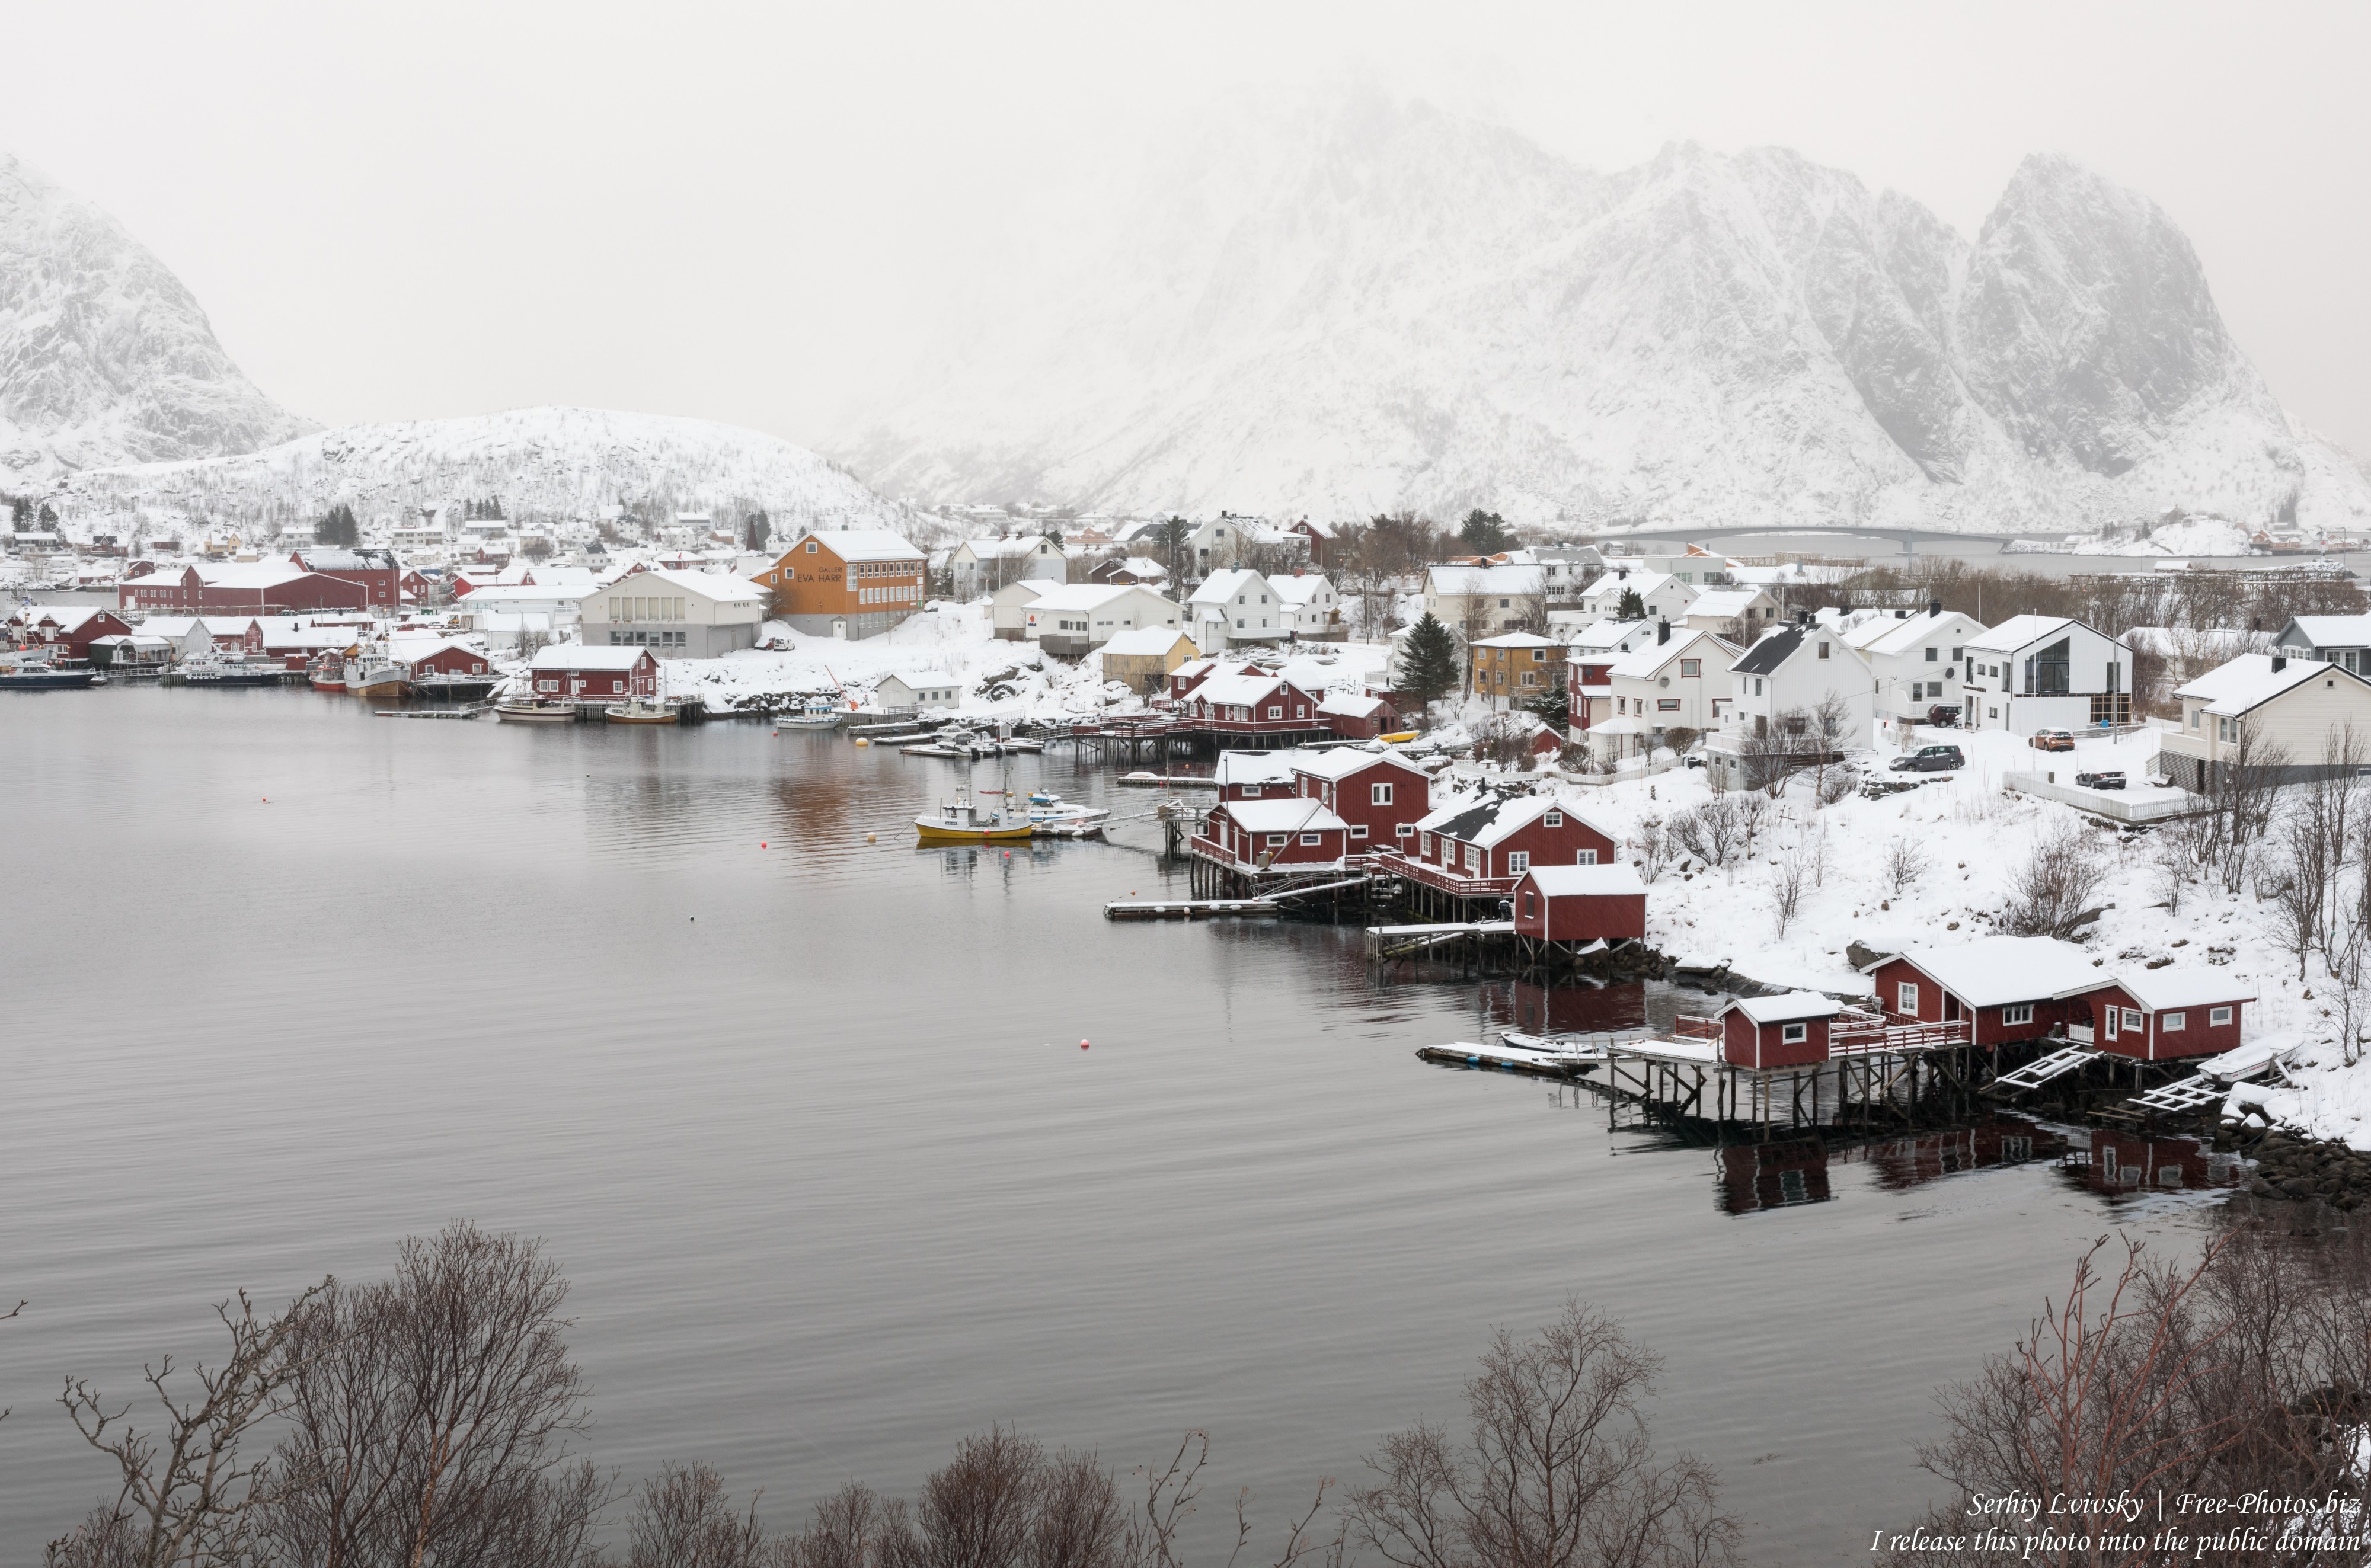 Reine and surroundings, Norway, in February 2020, by Serhiy Lvivsky, picture 1